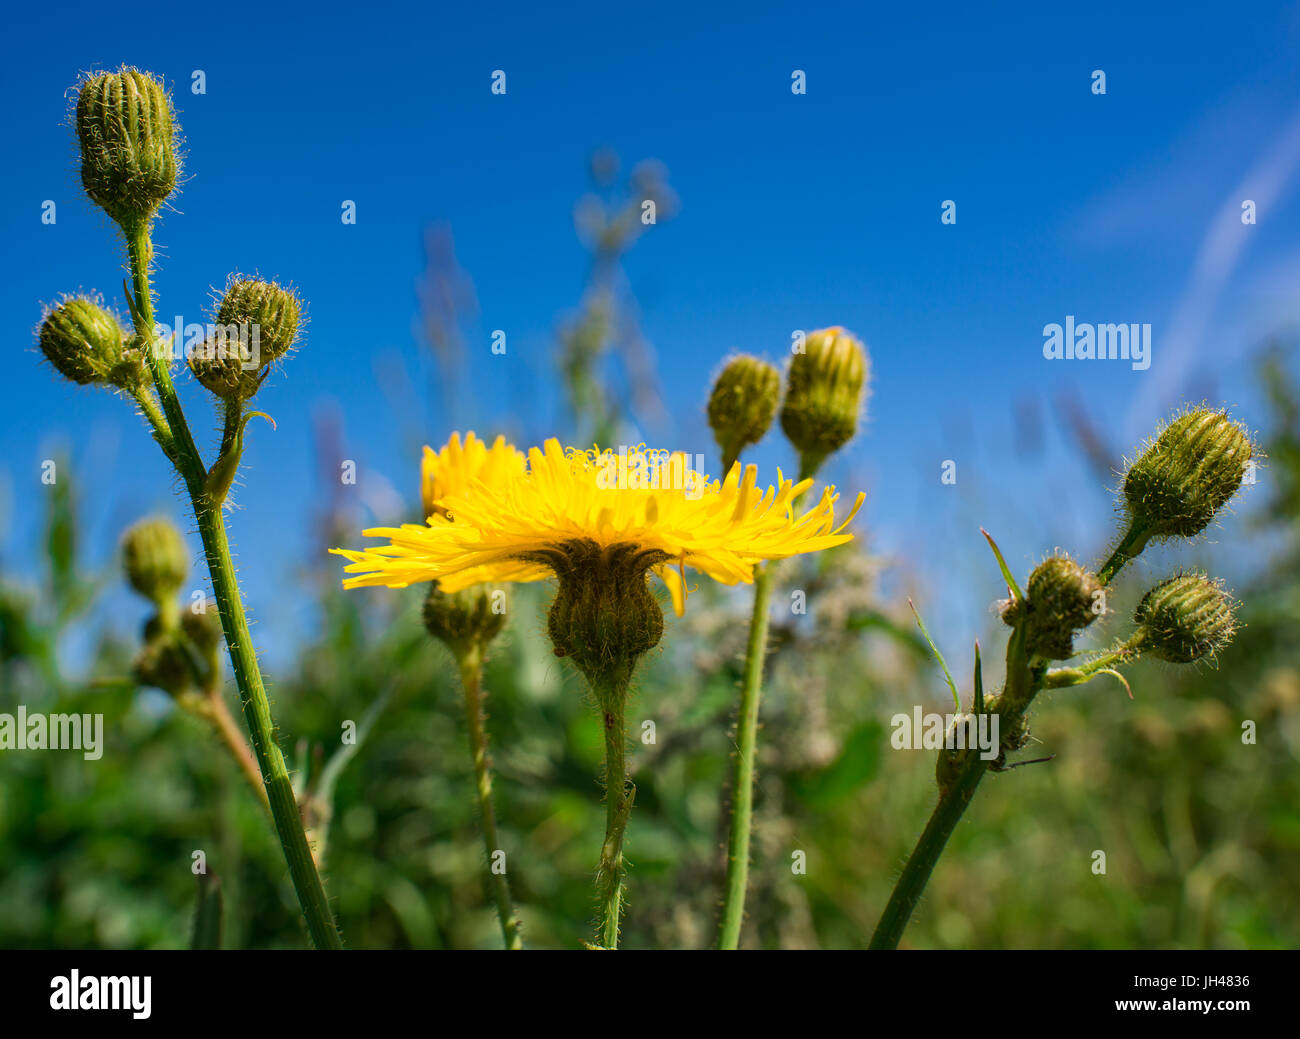 Hairy cat's ear plant flower and buds Stock Photo